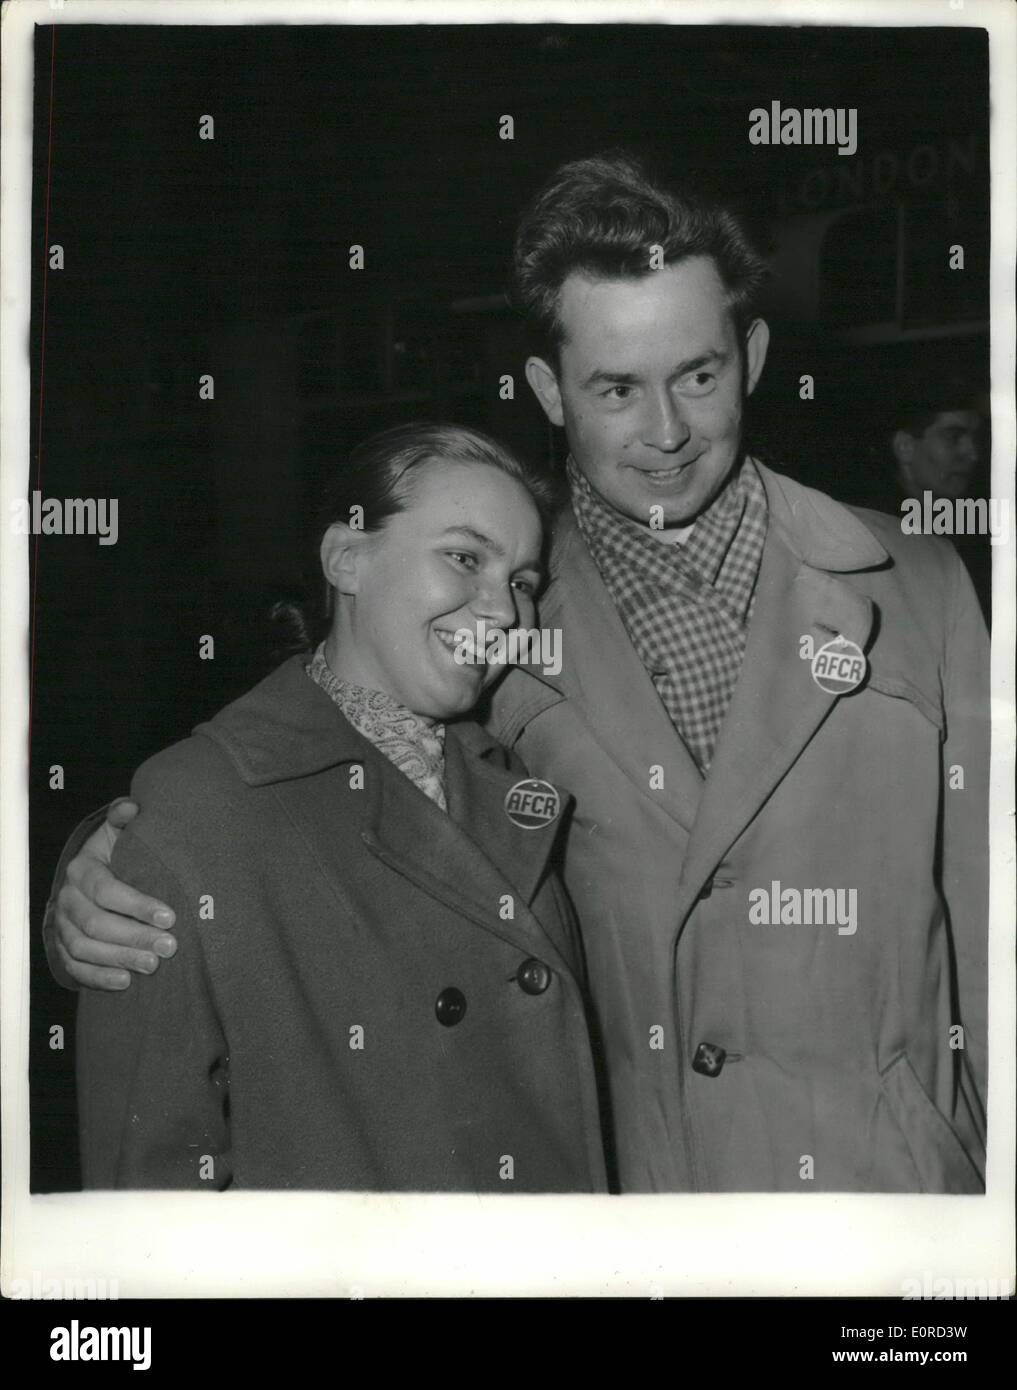 Mar. 03, 1959 - They Risked death for freedom: Mrs. Anne Zemanek, 24, and her husband, Zdenek, 27, who risked death to make a 15-minute flight to freedom fro Czechoslovakia, pictured last night when they arrived in London. They had planned their escape for years after seeing political prisoners slaving in the uranium mines at jachymov, where they were school teachers. Both managed to get a transfer to he spa town of karlsbad - 15 minutes flying time from the west German border. There they joined a flying club and spent months awaiting their chance Stock Photo